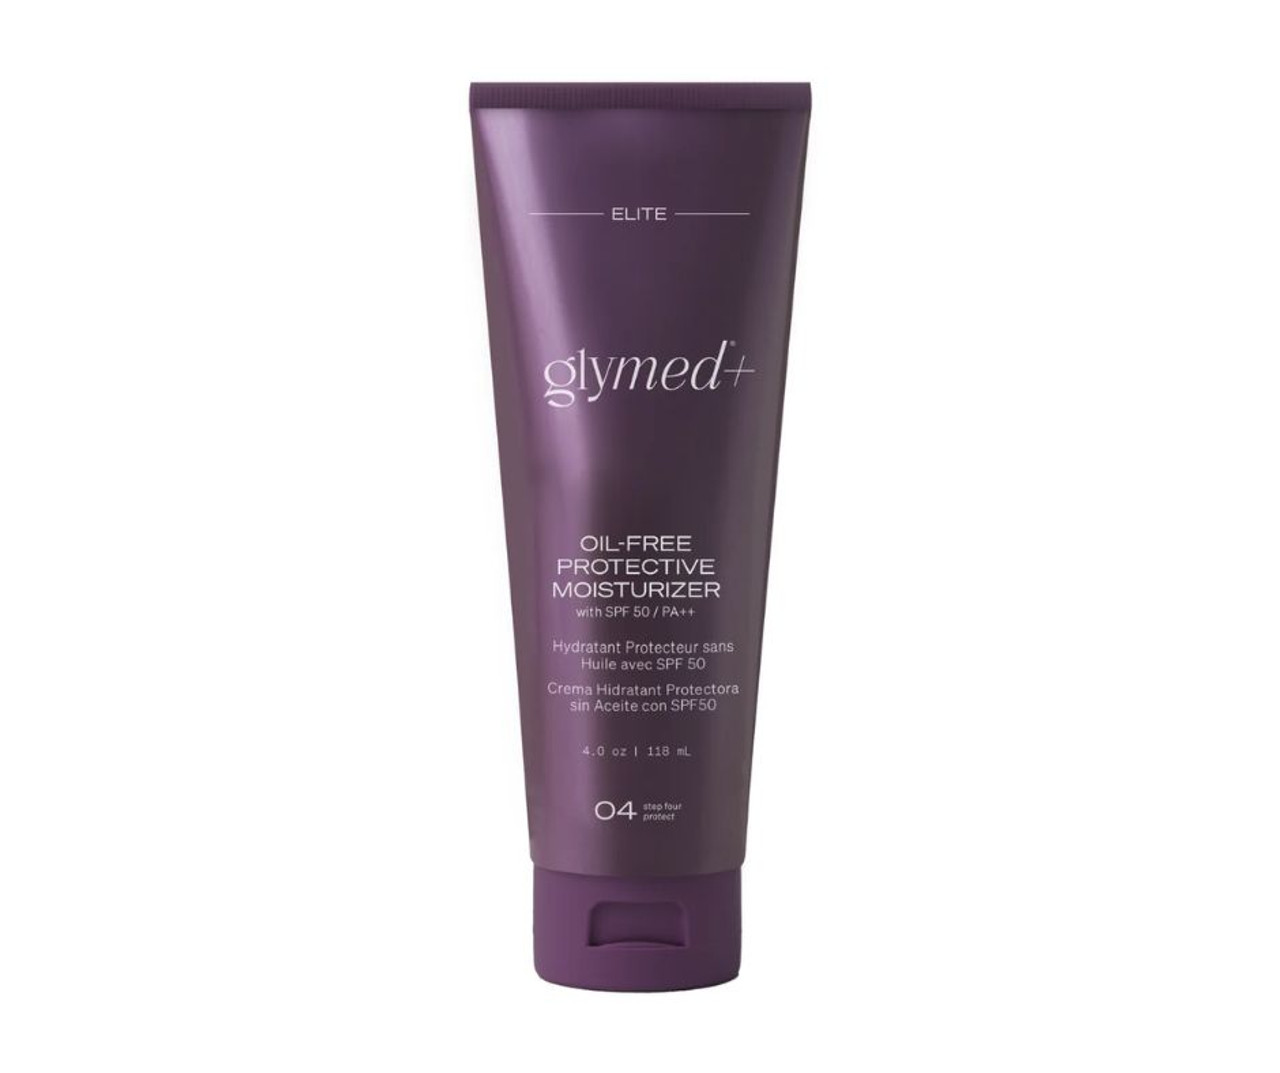 Glymed Plus Oil-Free Protective Moisturizer with SPF 50 